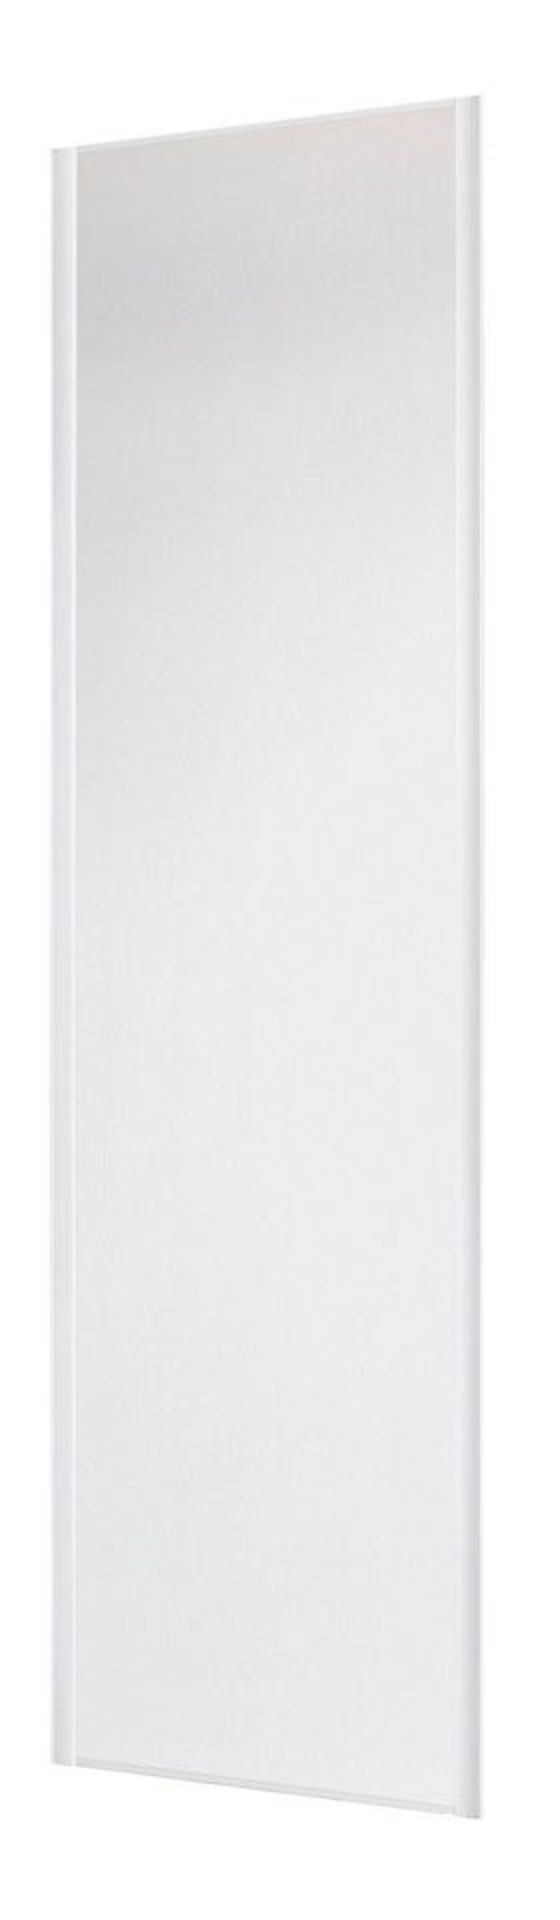 1 x VALLA 1 Sliding Wardrobe Door In White Decorative Panel With White Lacquered Steel Profiles - CL